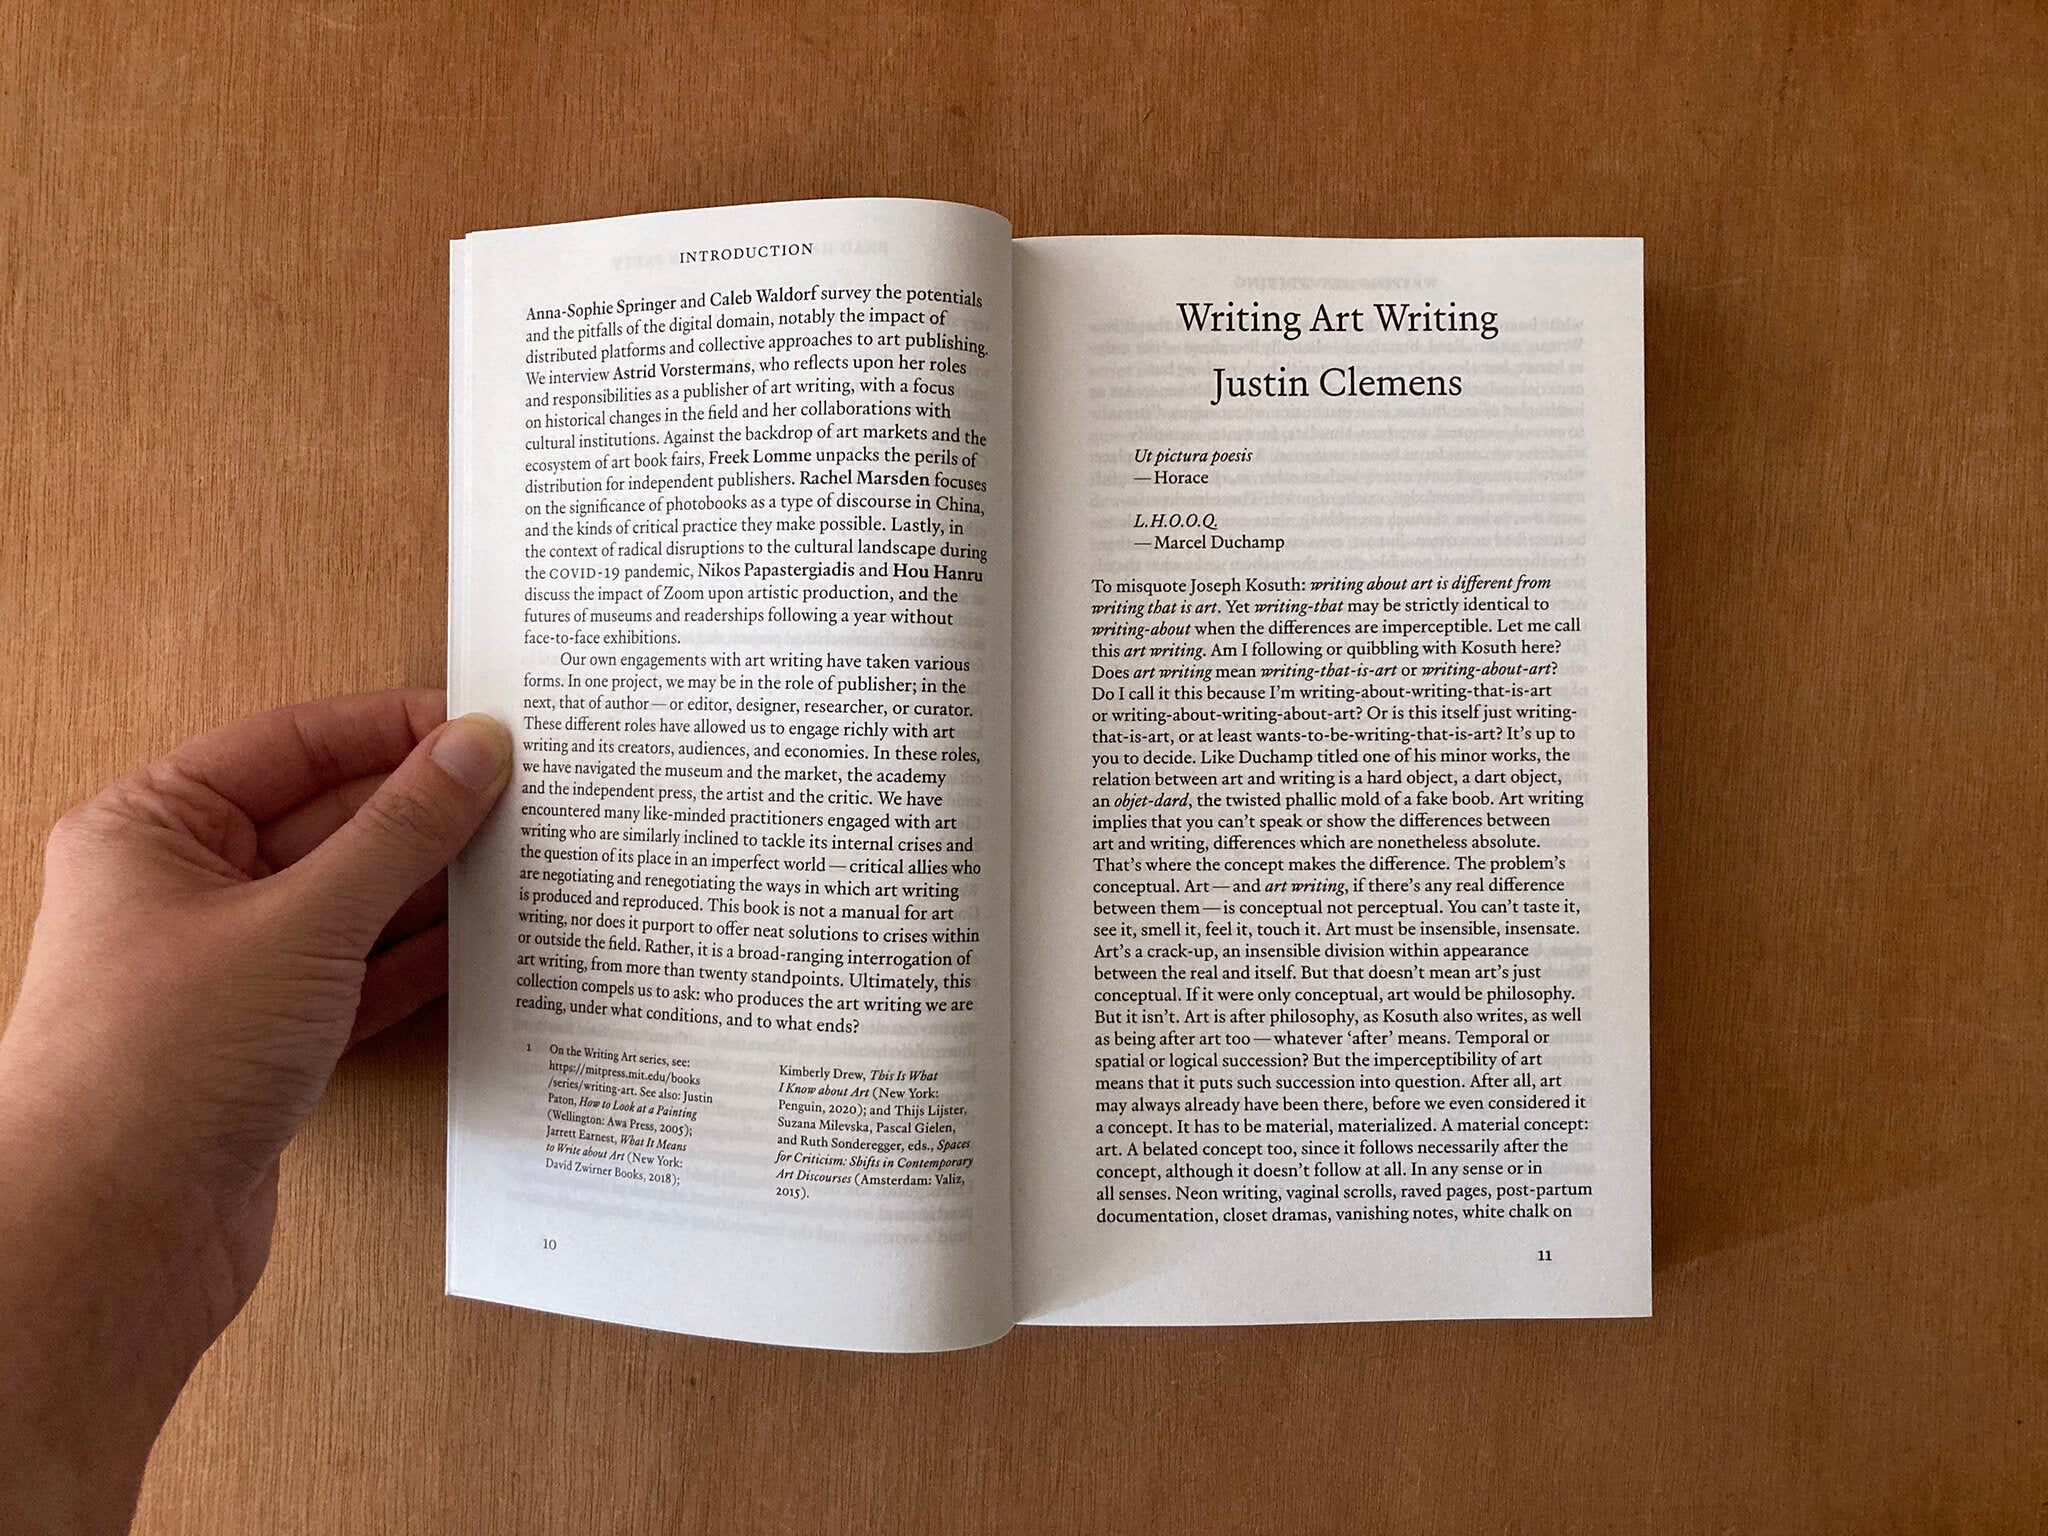 ART WRITING IN CRISIS edited by Brad Haylock and Megan Patty